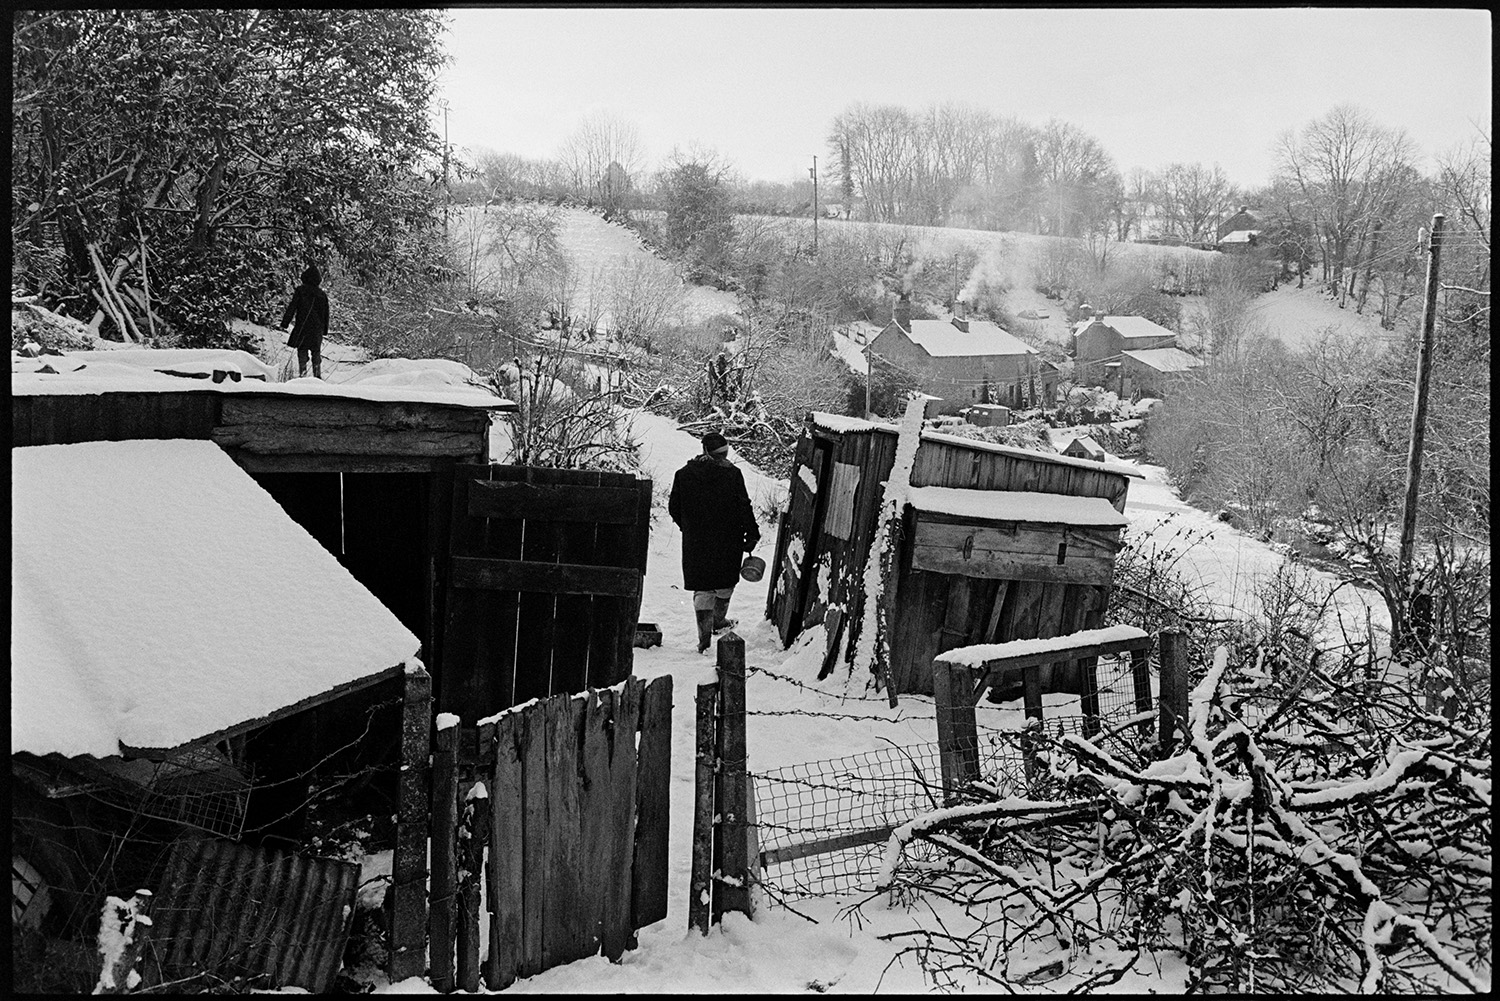 Snow scene with sheds. 
[People checking on livestock, possibly chickens or poultry, in wooden snow covered sheds at Millhams, Dolton. Cottages with smoke rising from their chimneys can be seen in the background.]